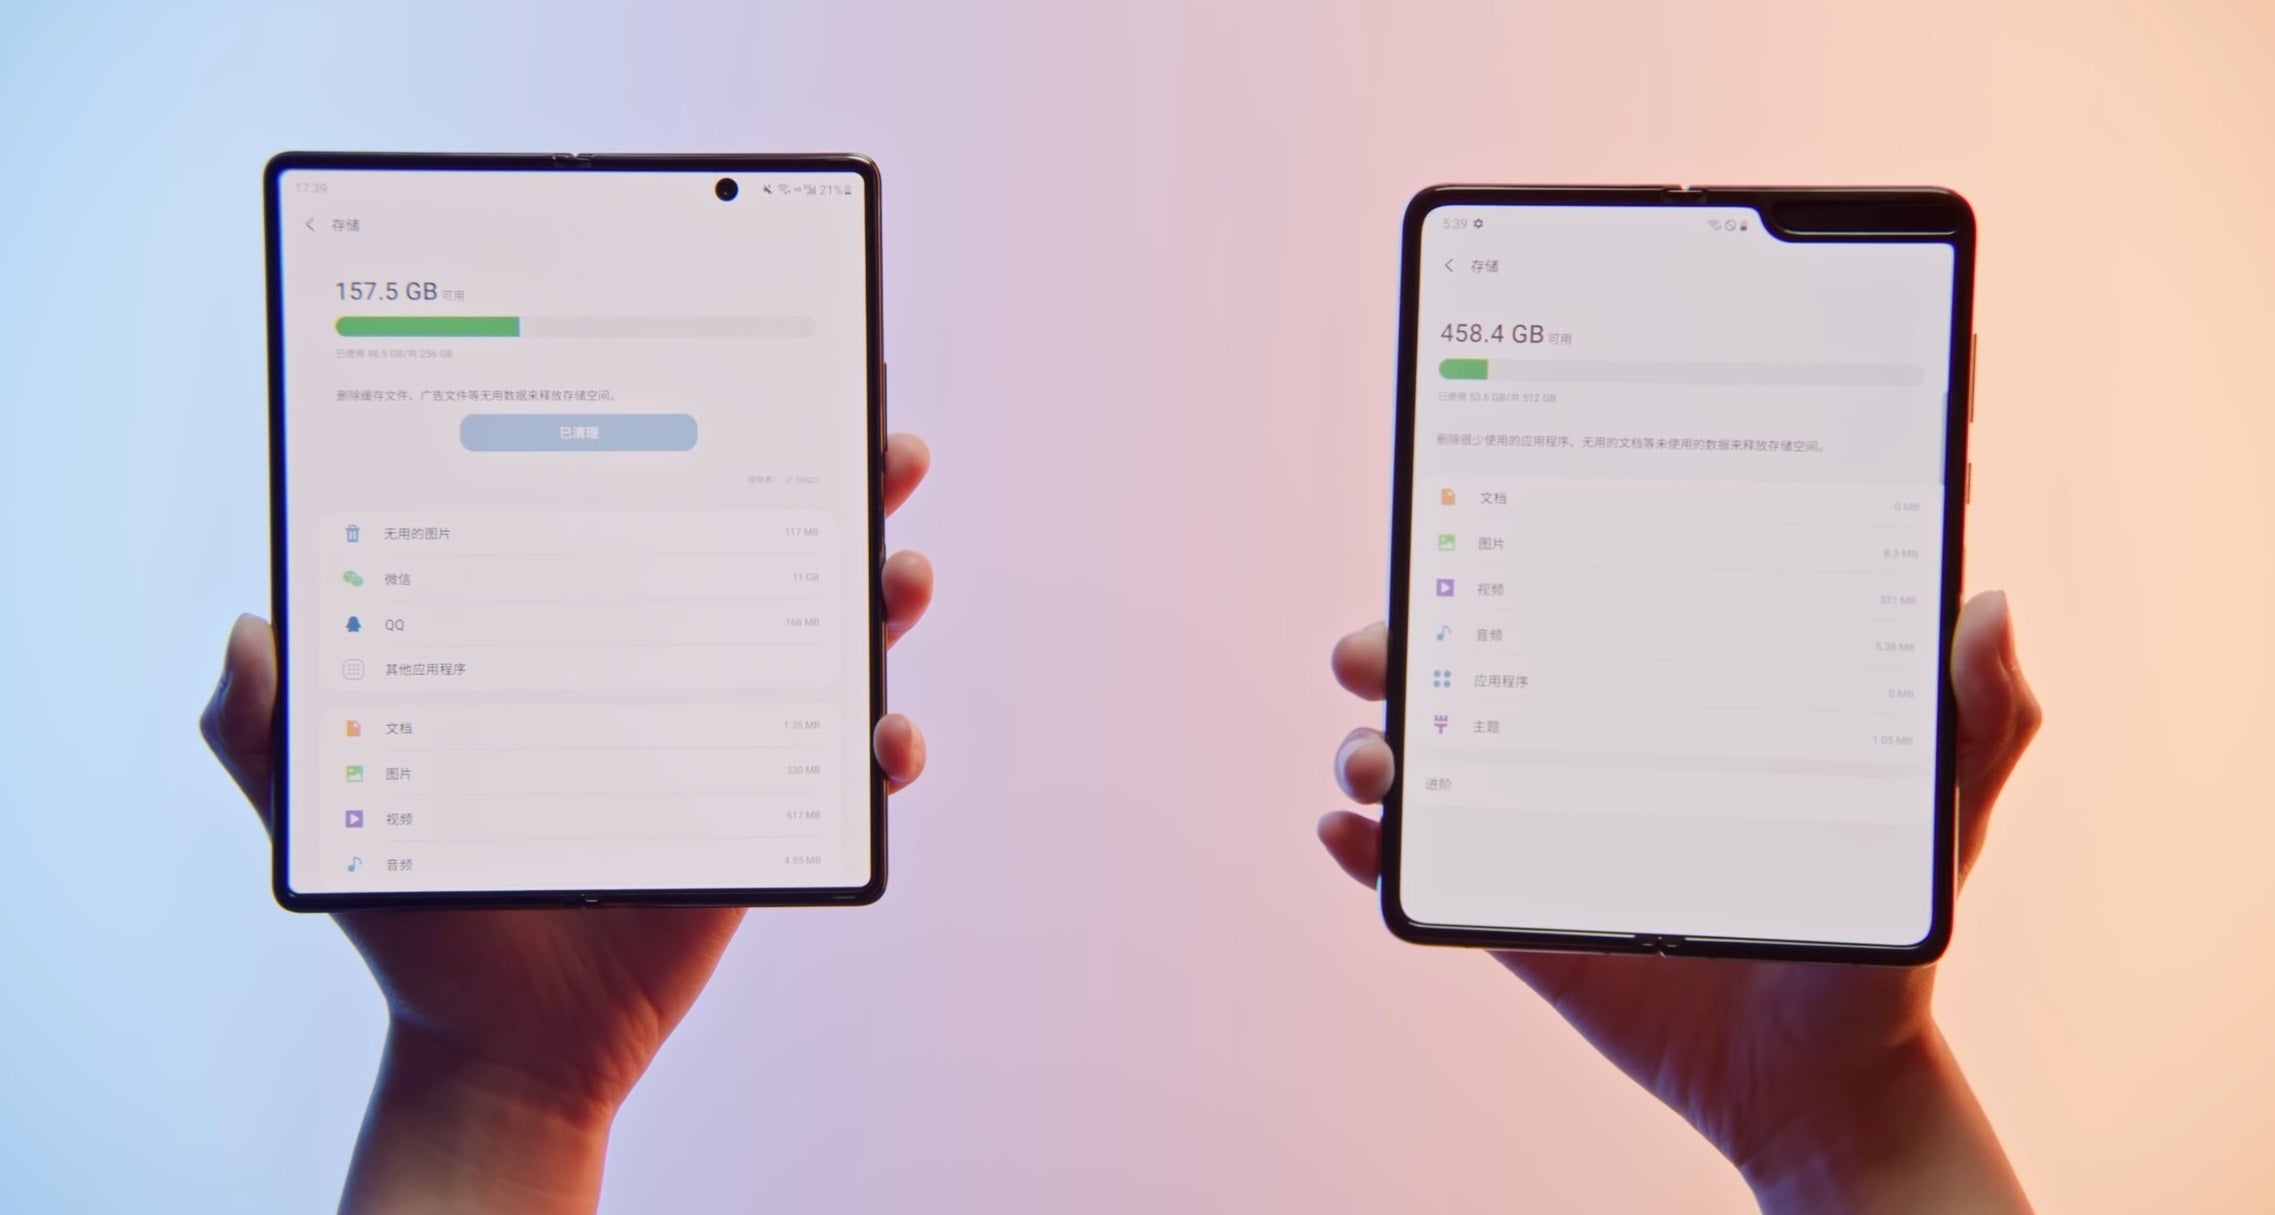 Galaxy Z Fold 2 on the left, Galaxy Fold on the right - Early review of the Galaxy Z Fold 2 leaves nothing hidden, gives most detailed look of the phone yet